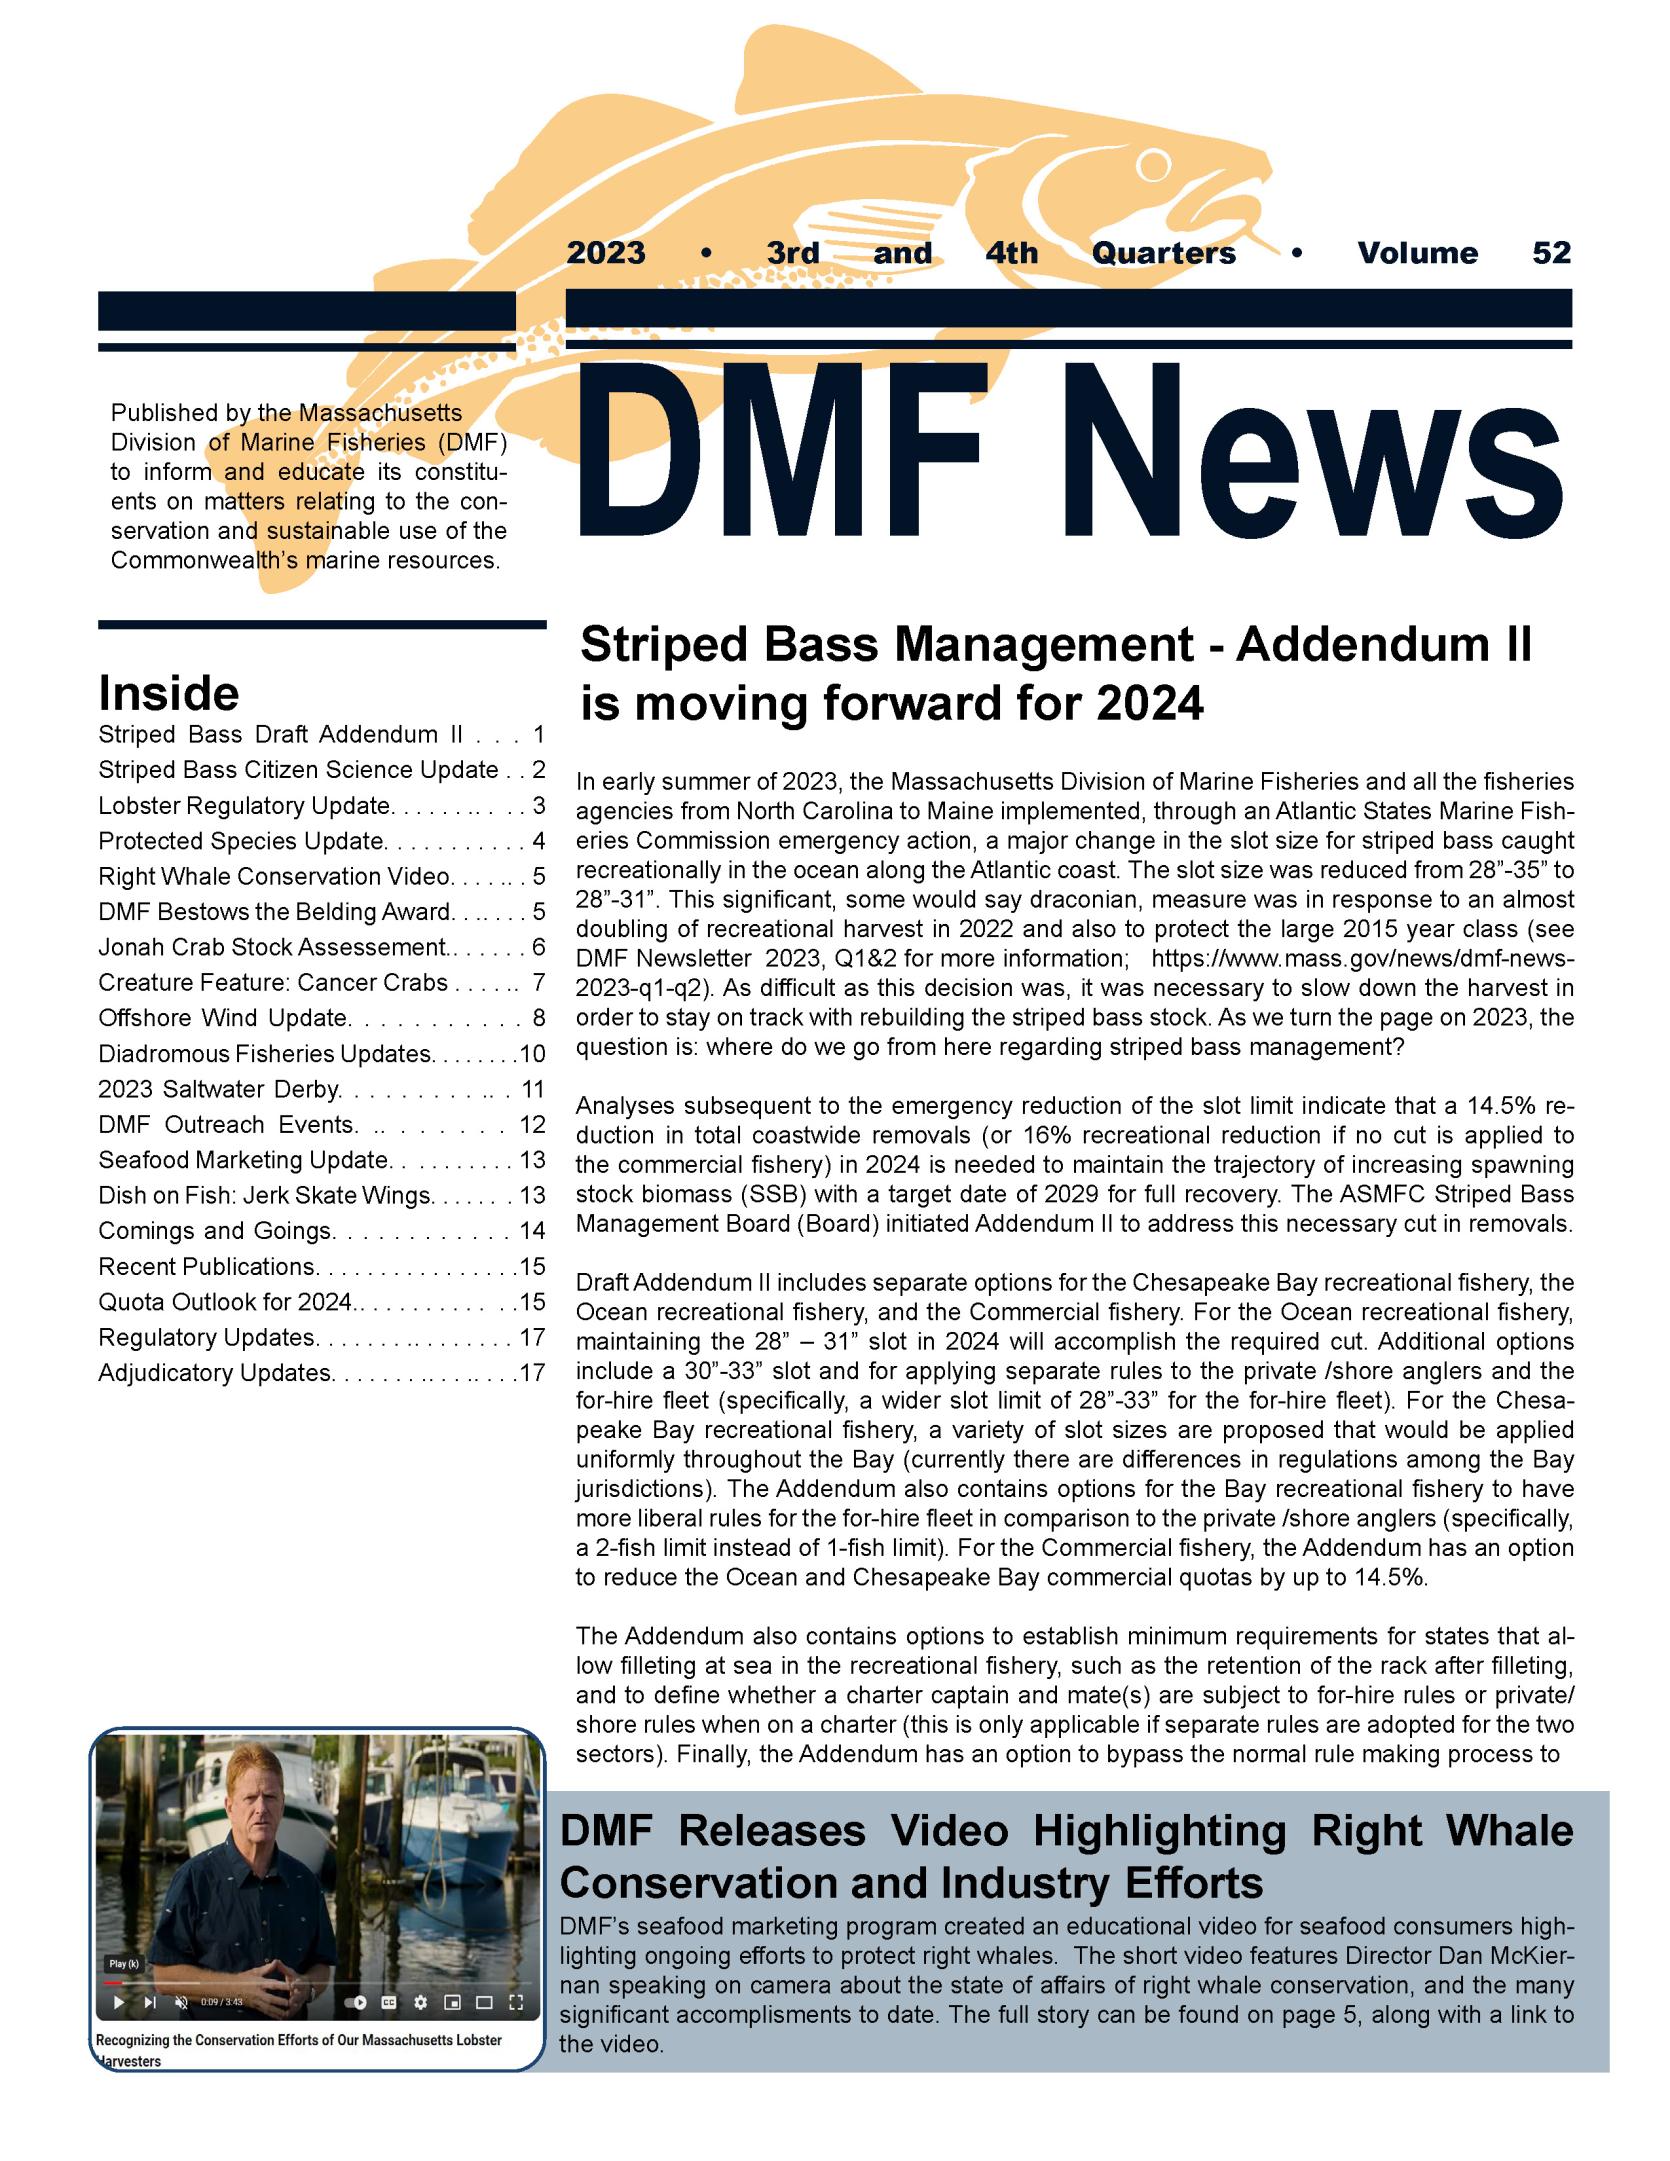 Cover page of DMF News 2023 Q3 and Q4 